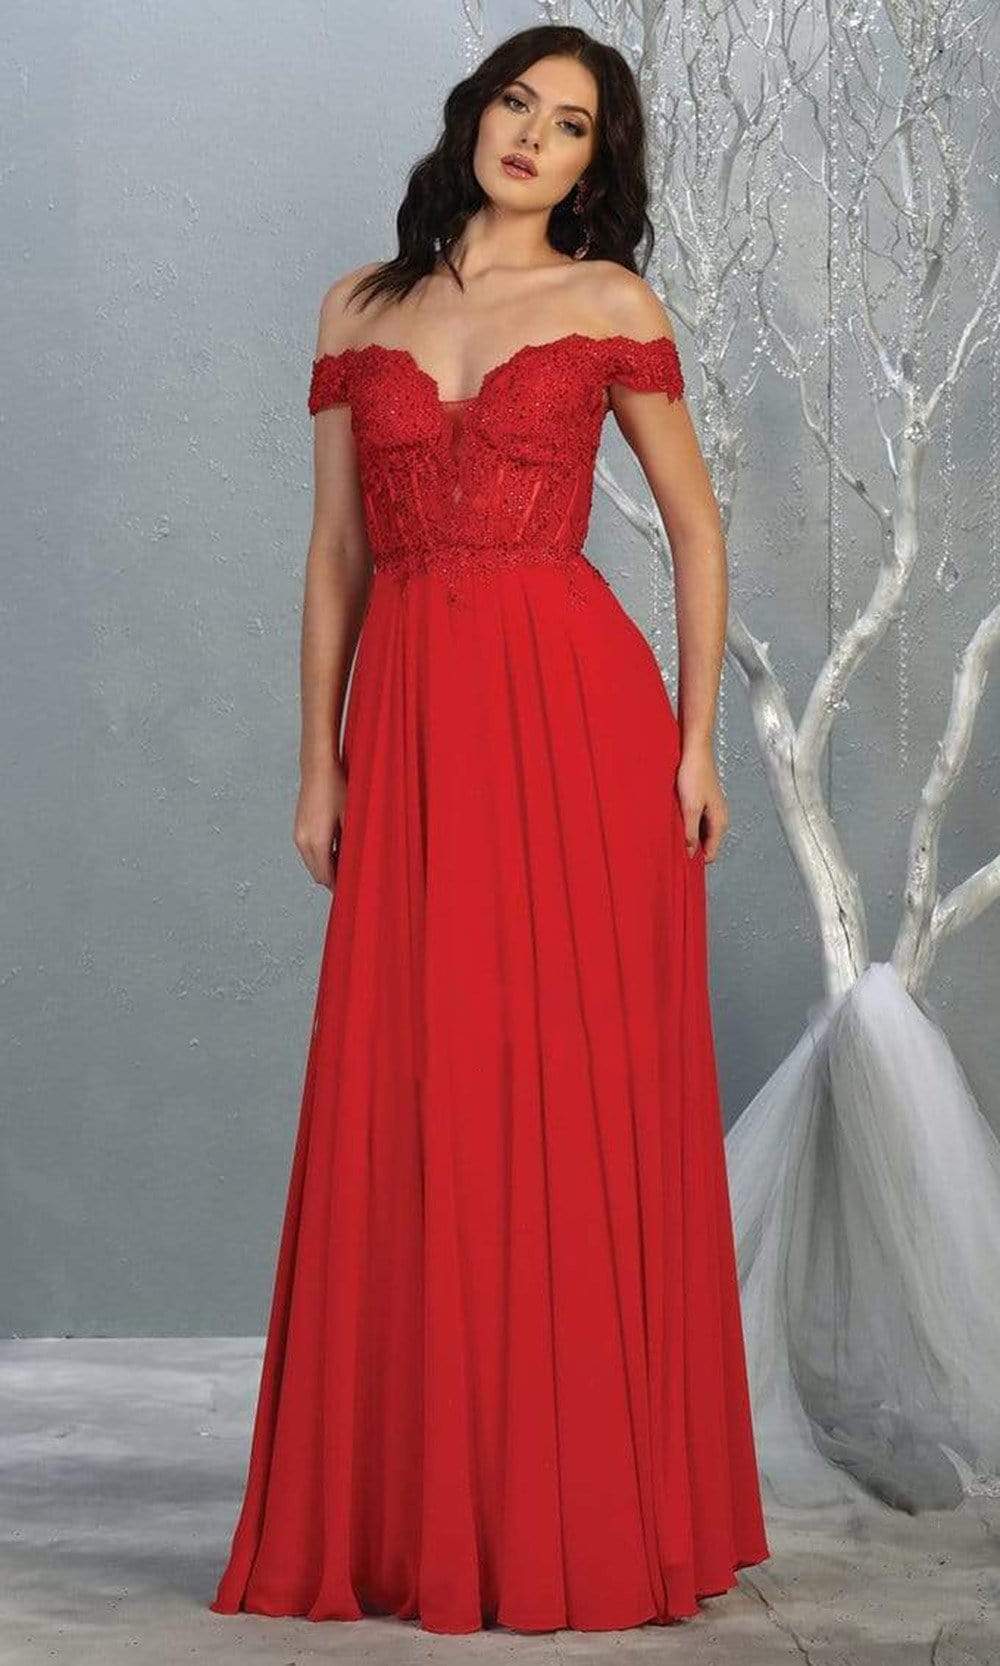 May Queen - MQ1714 Appliqued Sheer Corset Chiffon Dress Prom Dresses 4 / Red